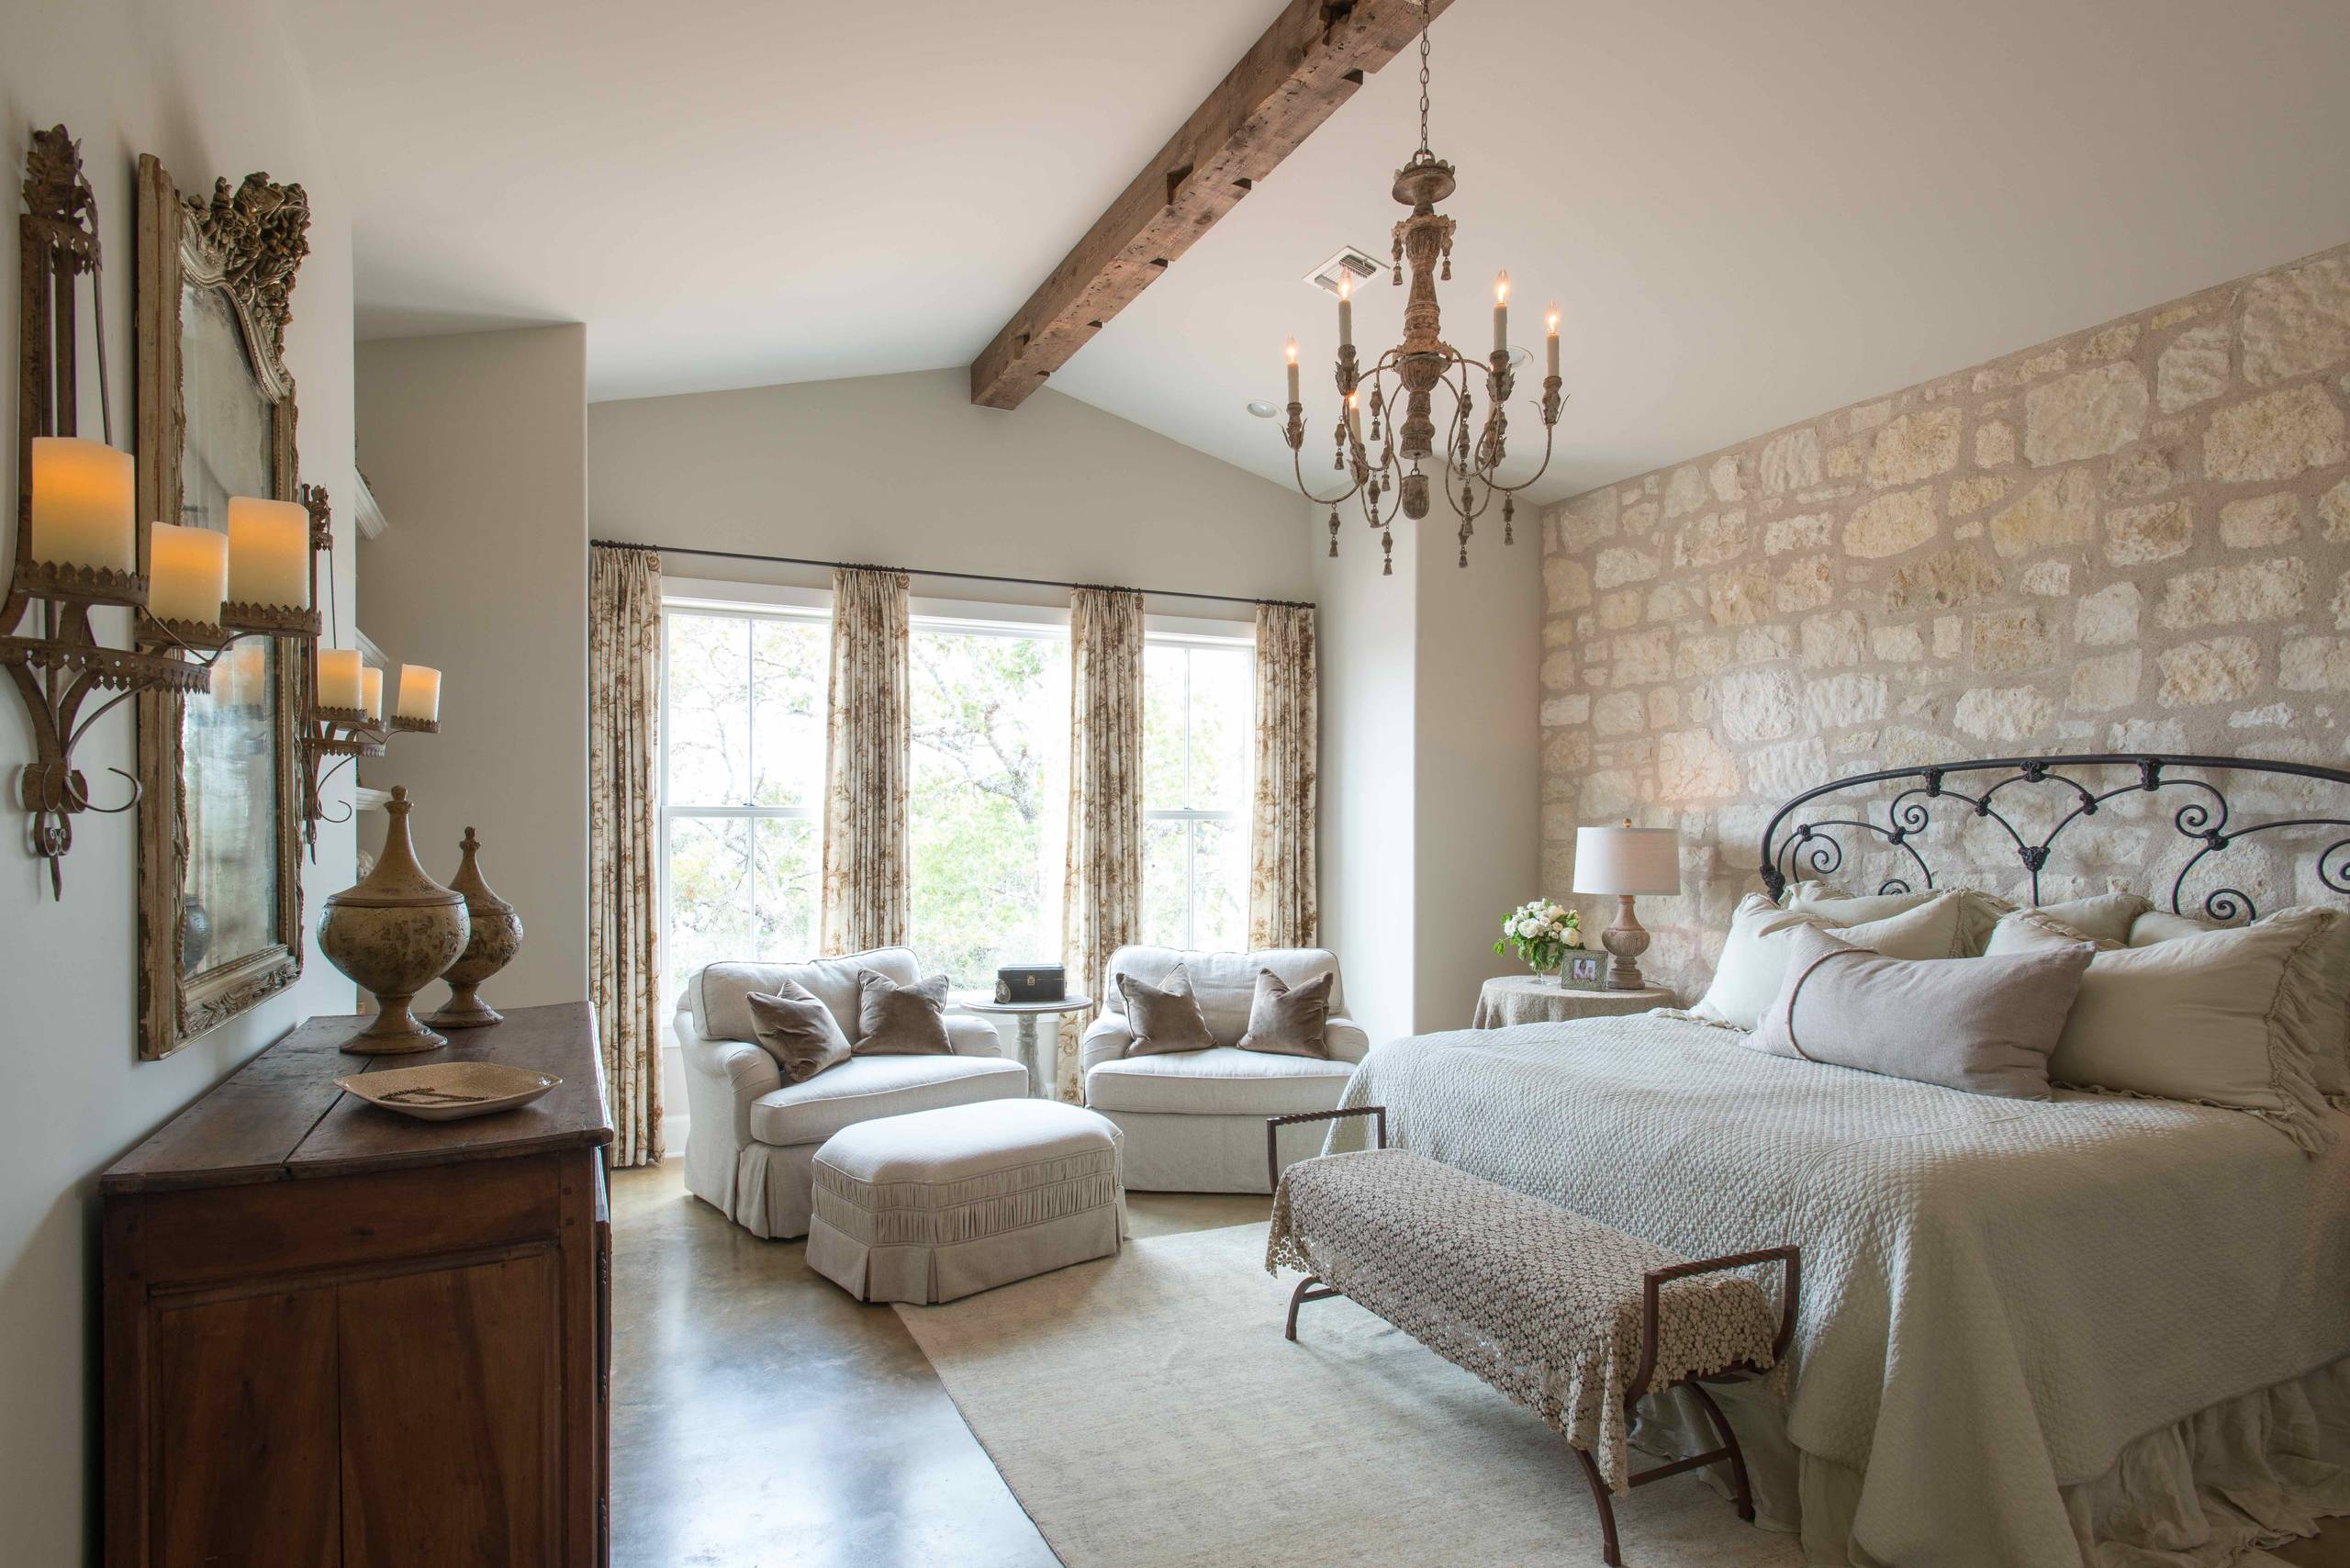 French Country Style Bedroom Decorating Ideas - Home Decorating Ideas